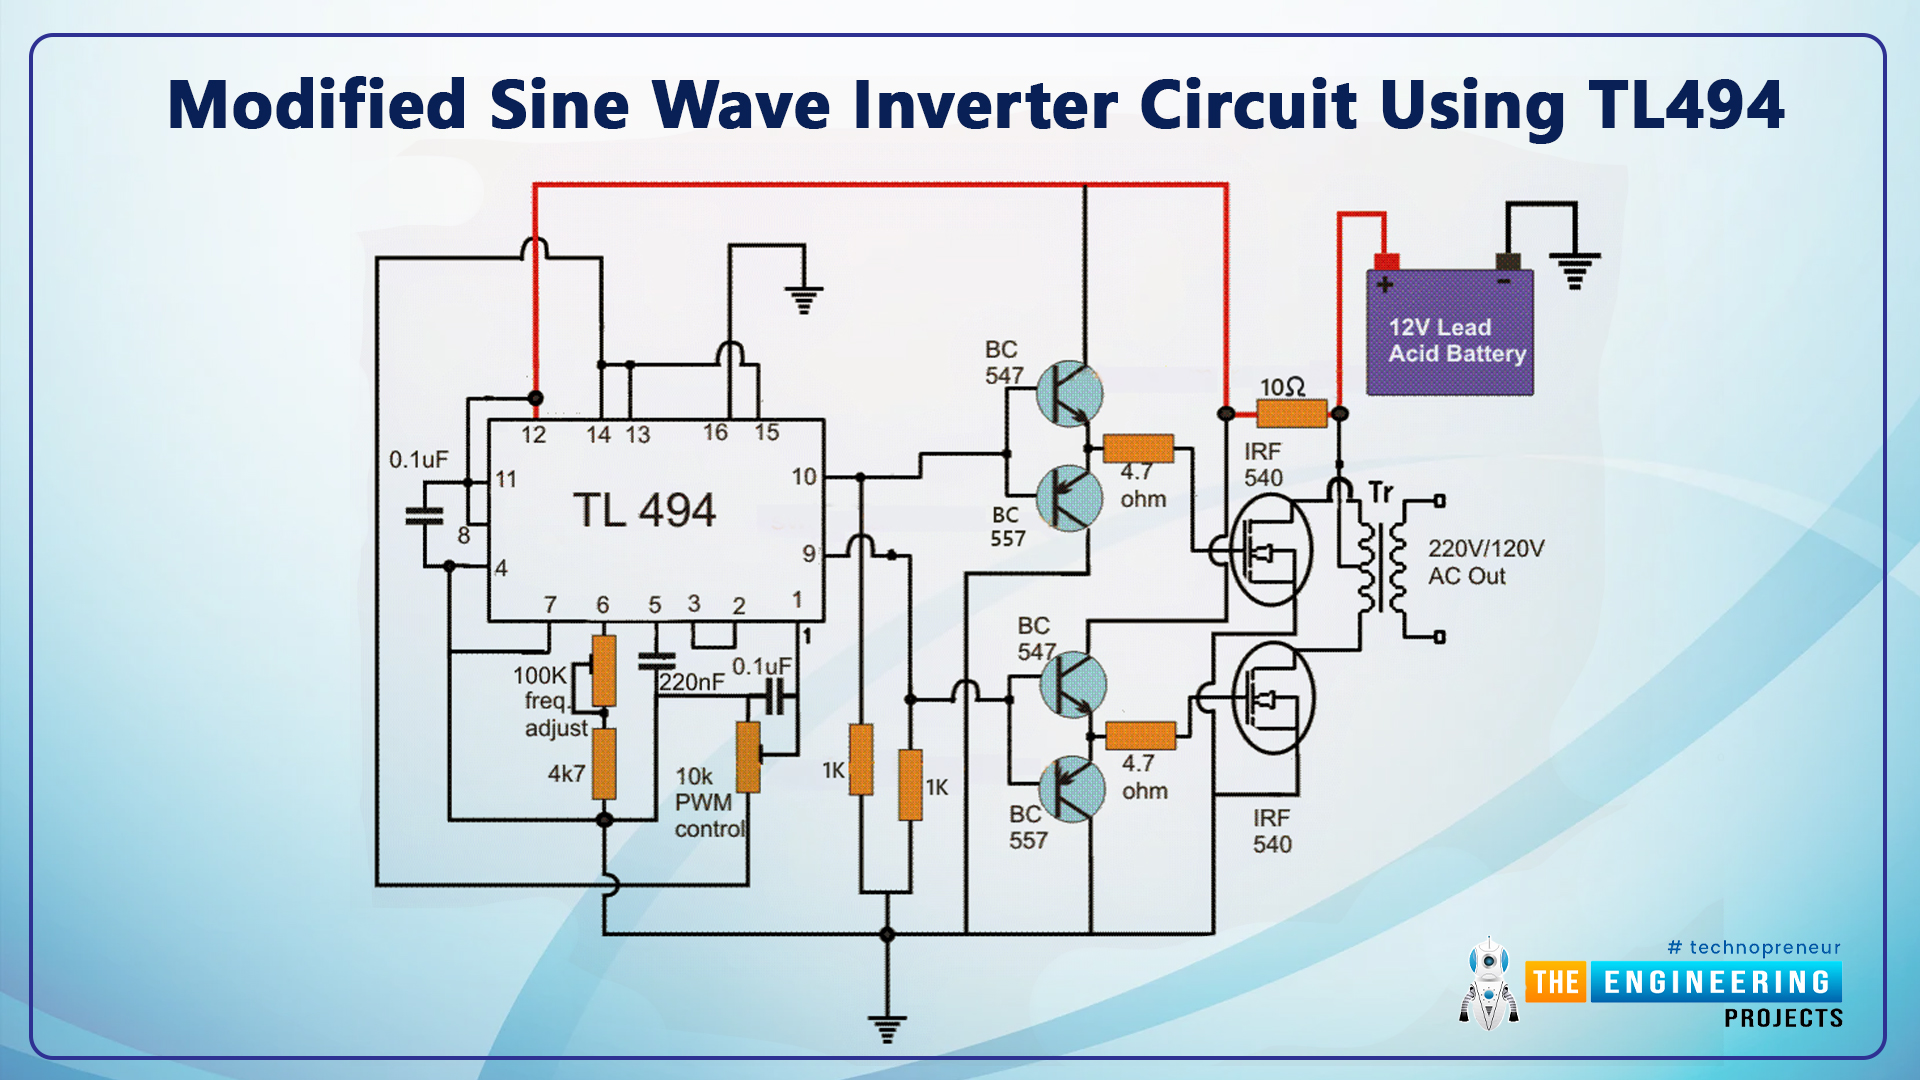 Modified Sine Wave Inverter Circuit using TL494, tl494 circuit, tl494 sine wave, tl494 sine wave